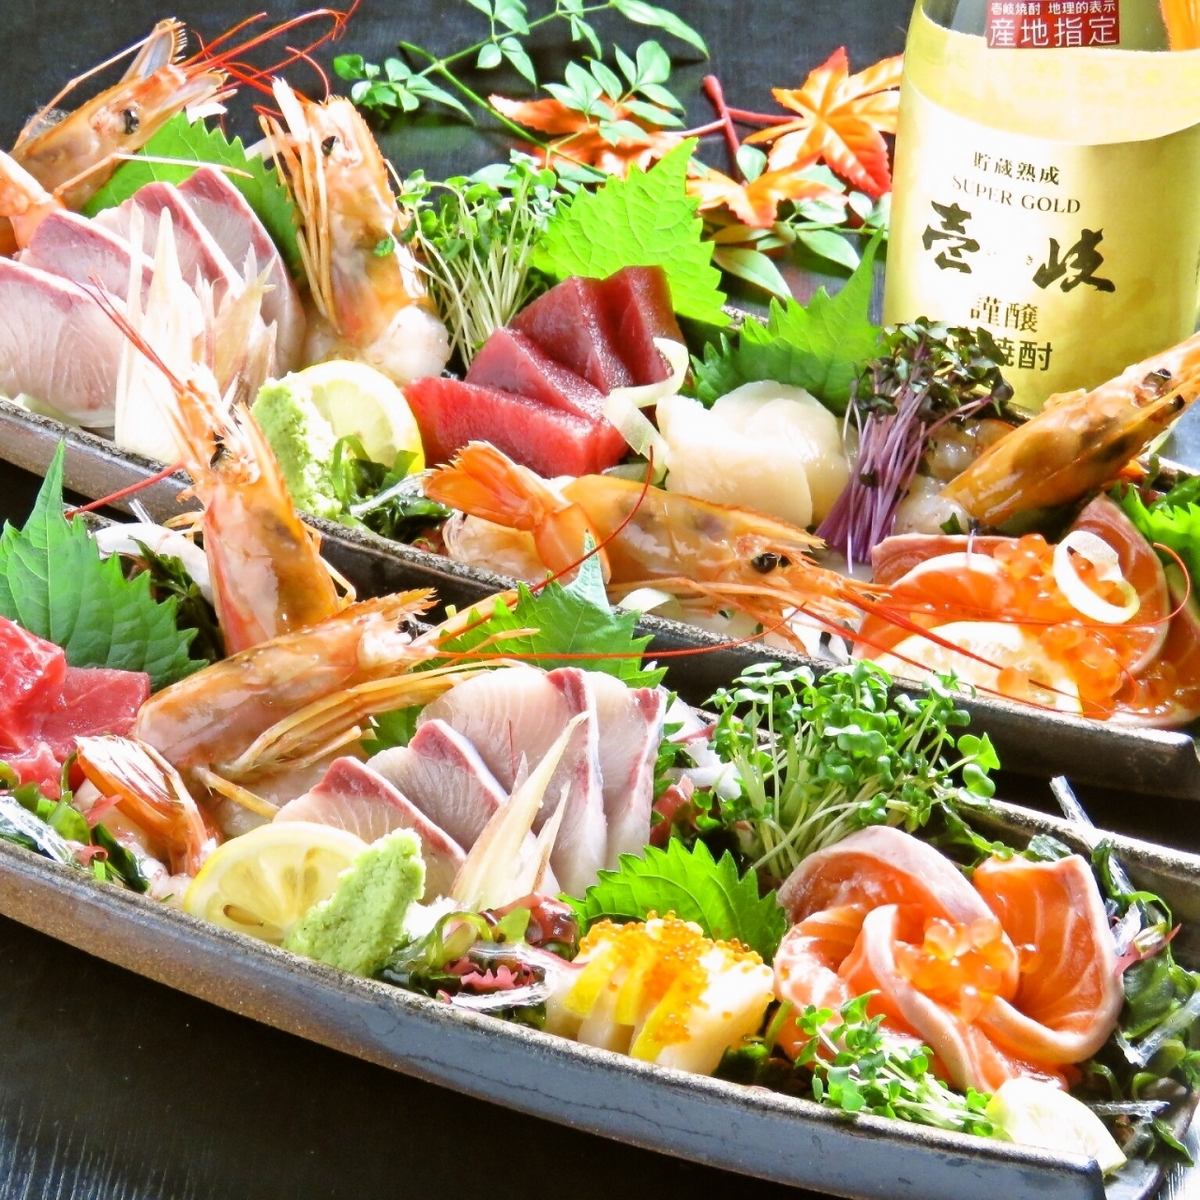 Special course includes all-you-can-eat fresh fish★